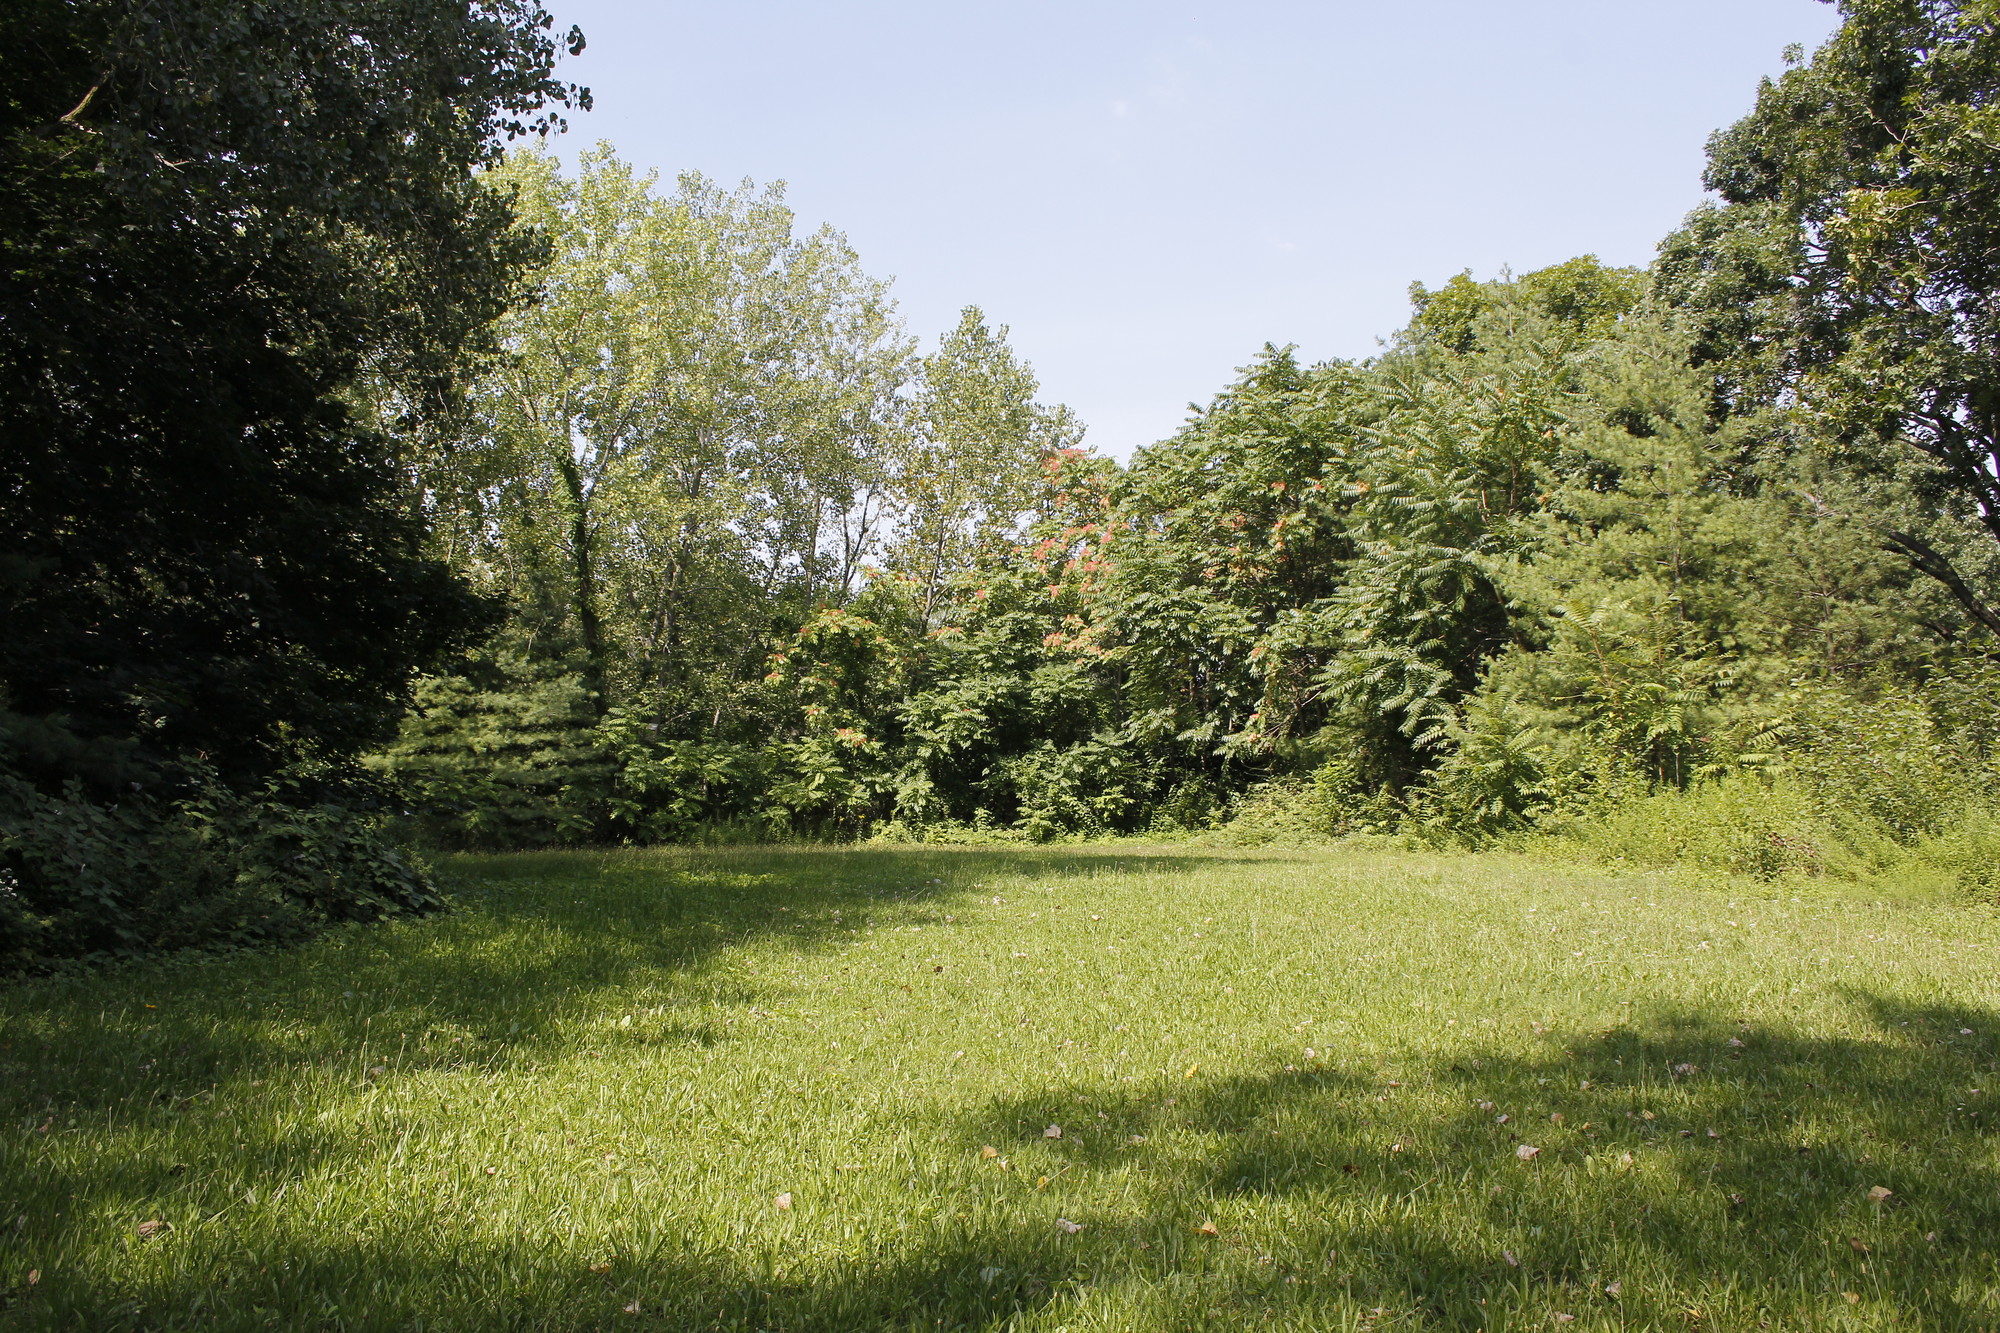 A meadow greets you when you enter the preserve on Tremont Place.